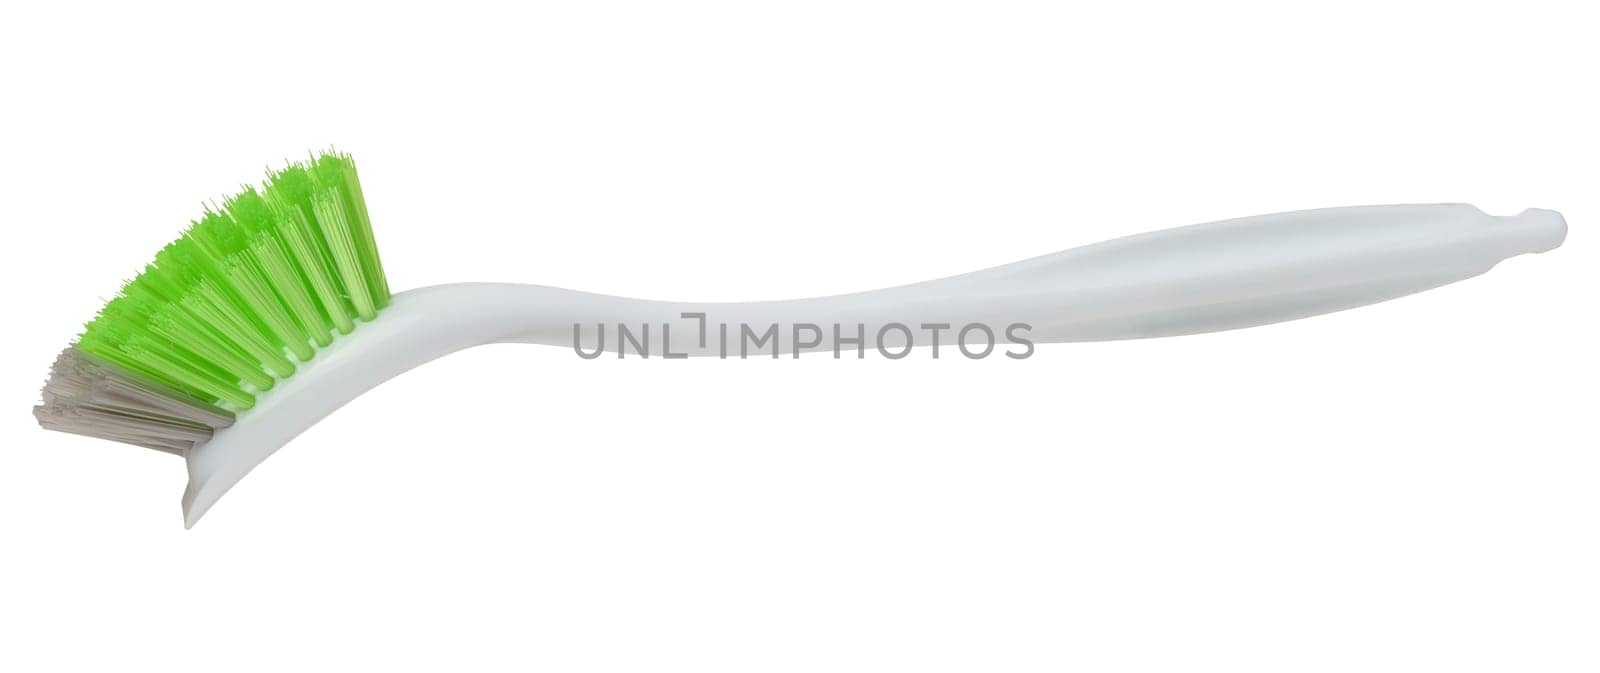 Plastic brush with handle for cleaning isolated on white background, close up